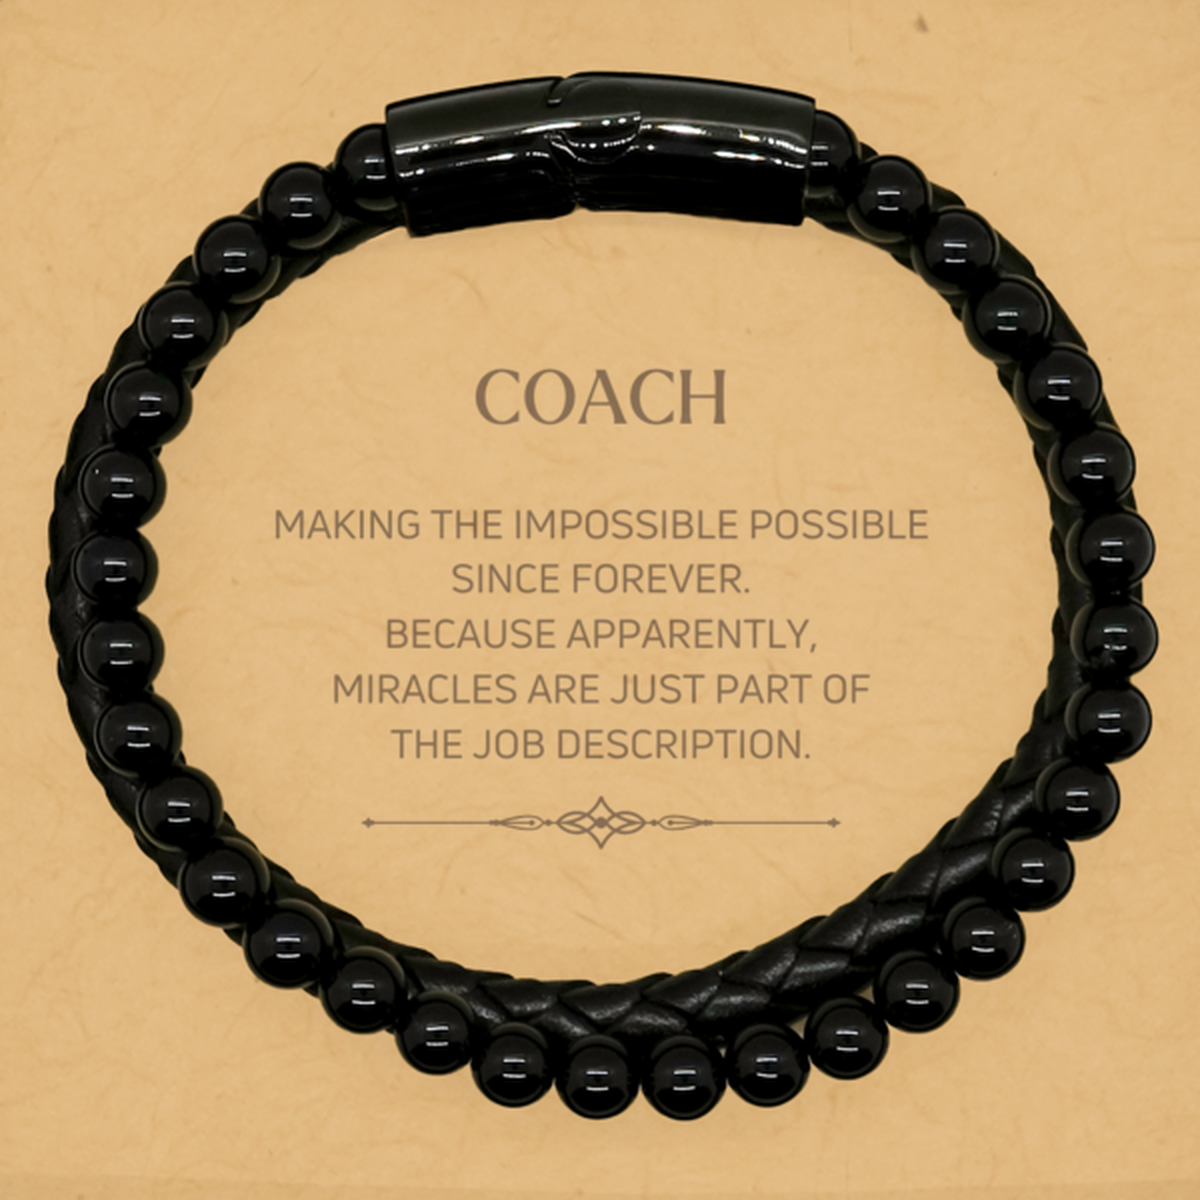 Funny Coach Gifts, Miracles are just part of the job description, Inspirational Birthday Stone Leather Bracelets For Coach, Men, Women, Coworkers, Friends, Boss